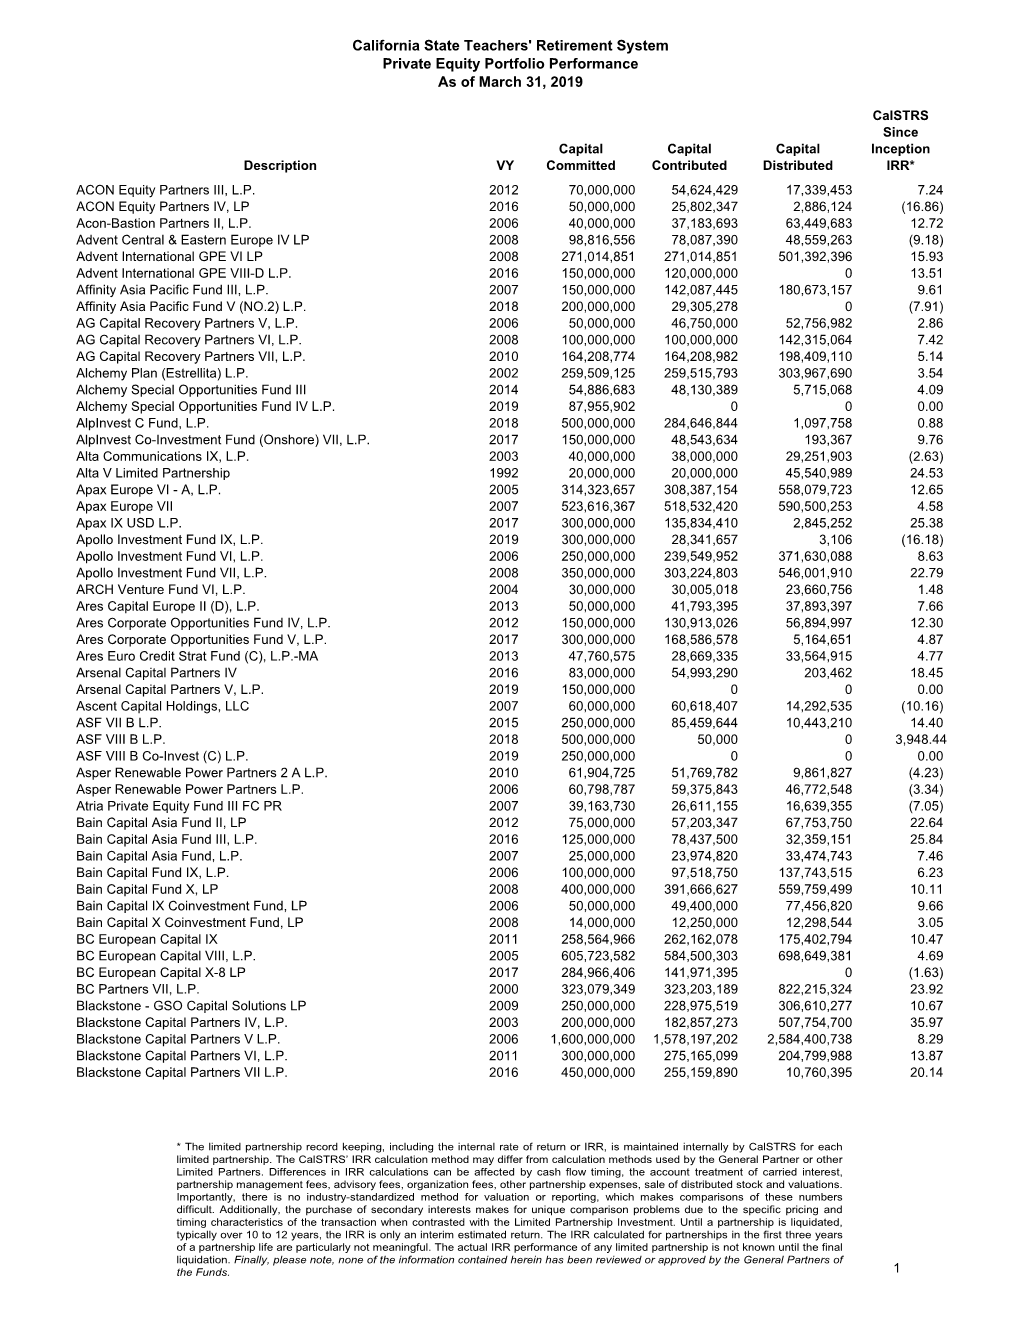 Calstrs Private Equity Portfolio Performance As of March 31, 2019